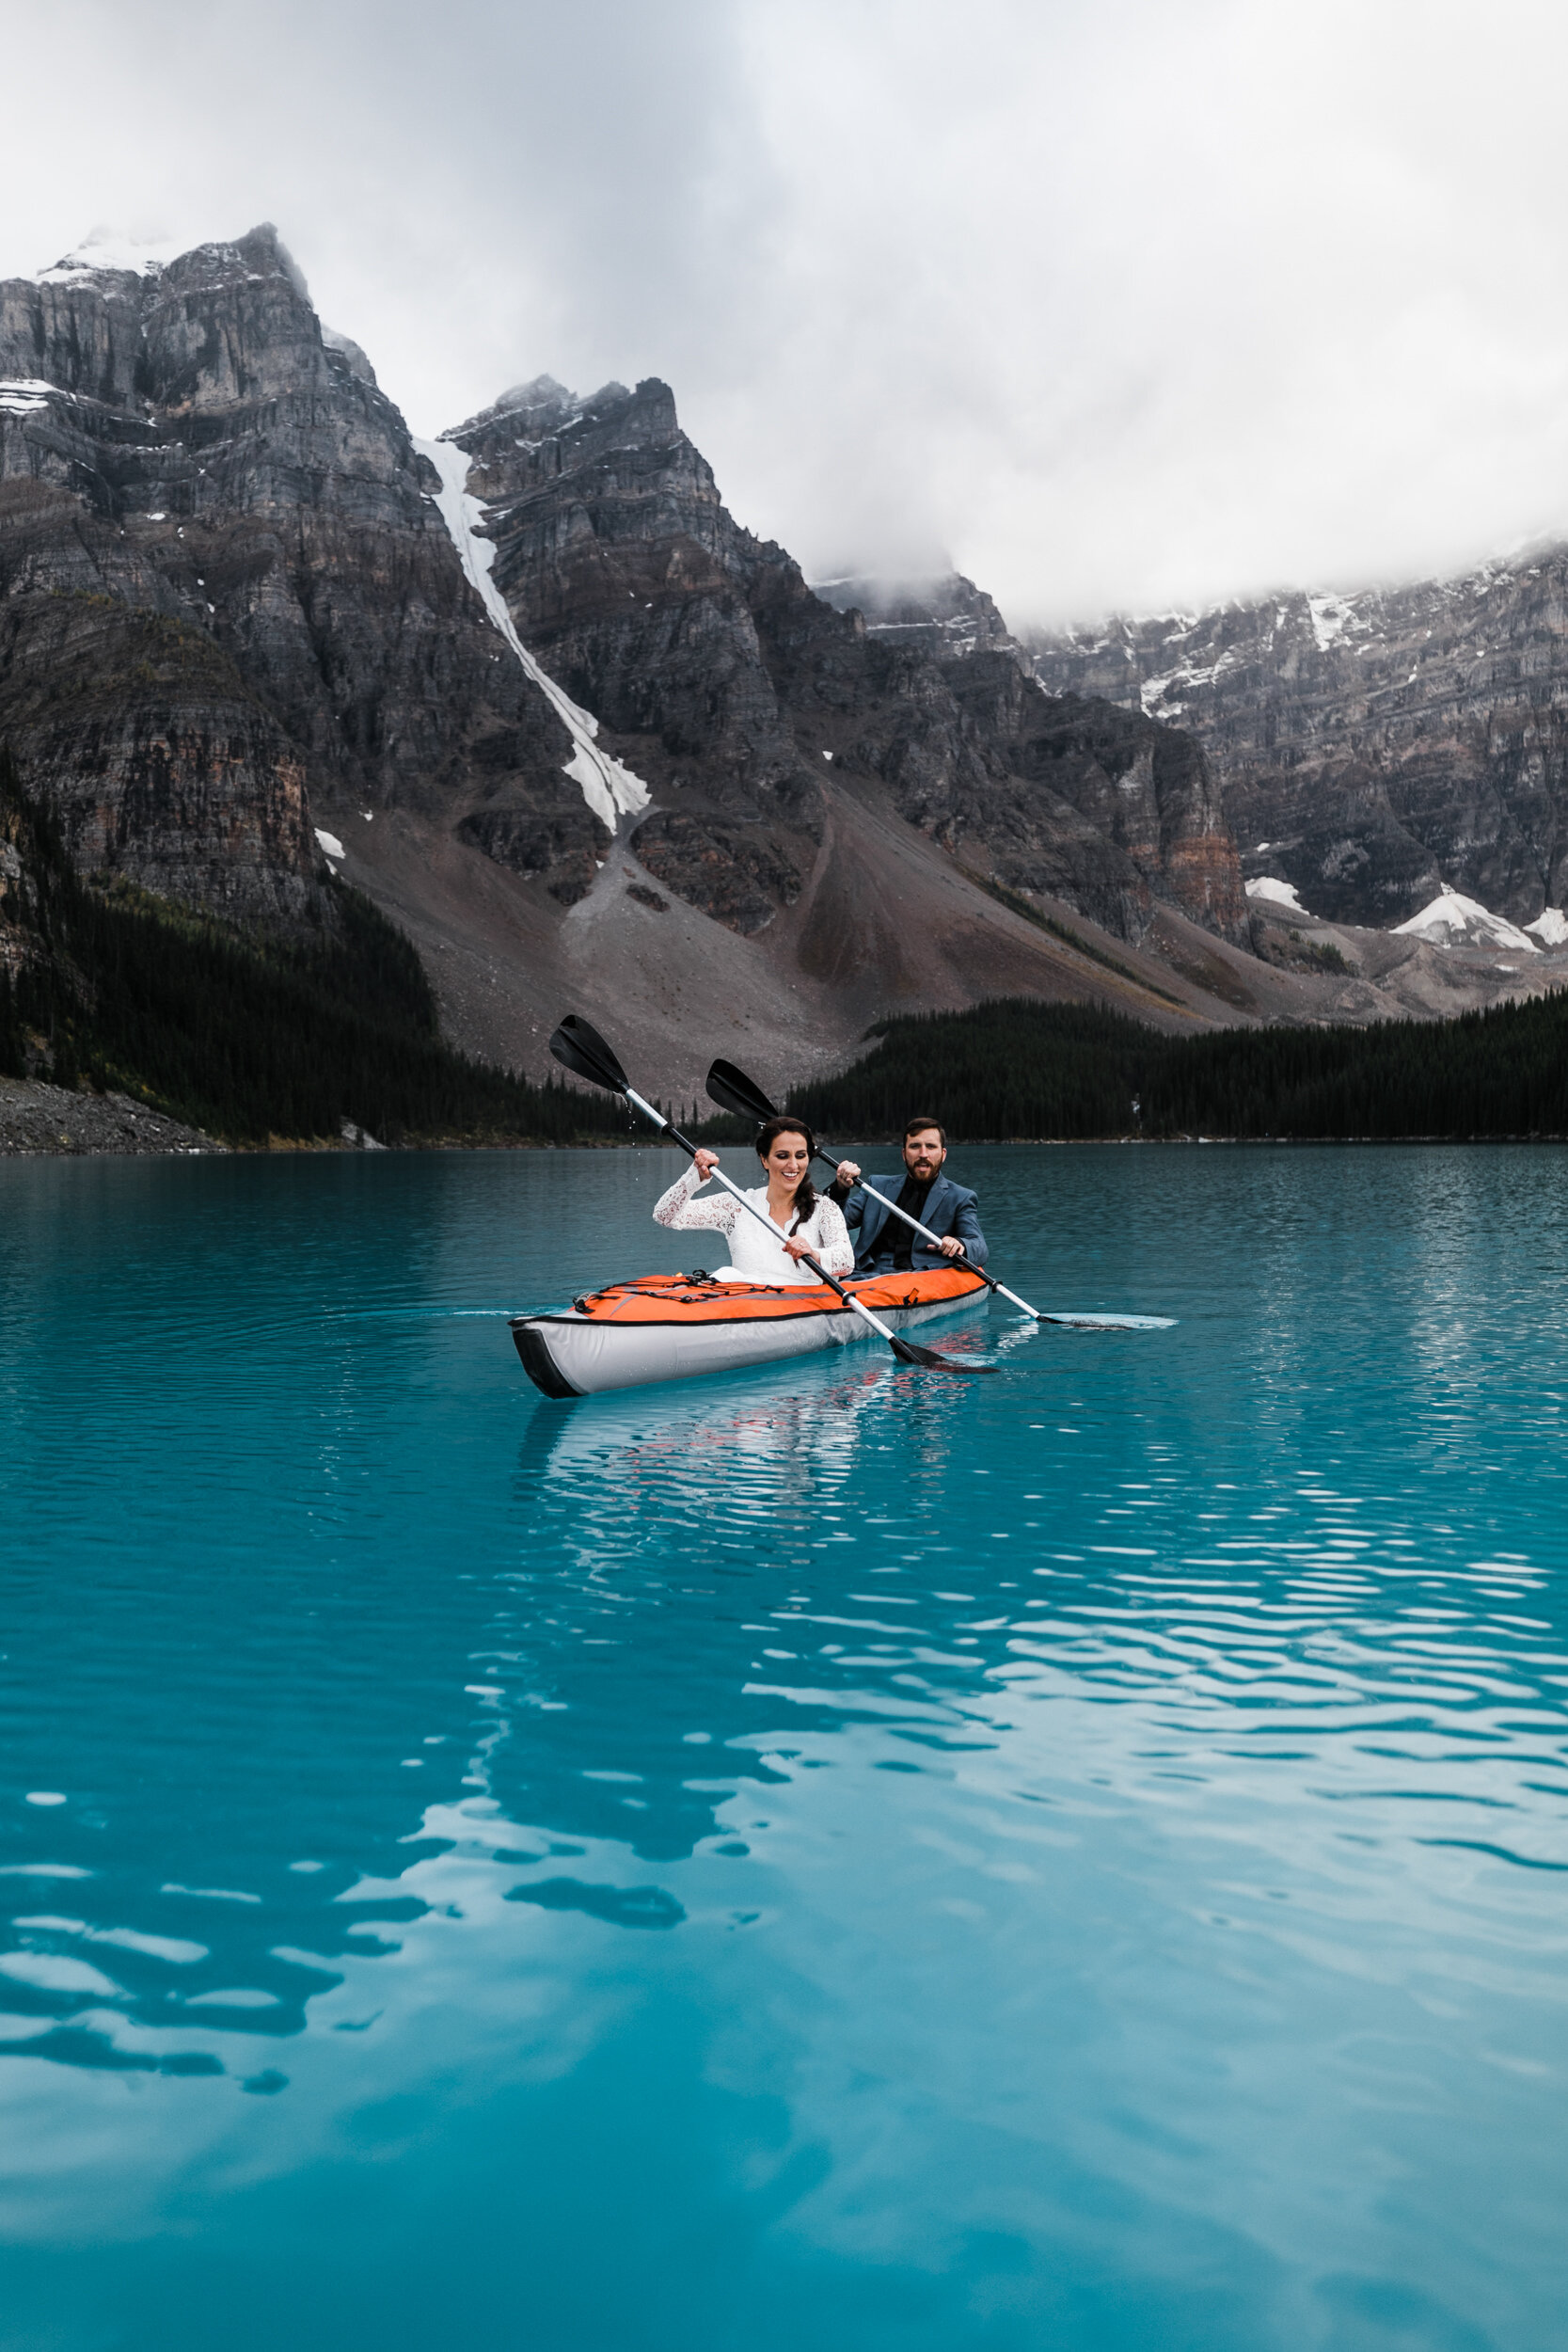 The Hearnes Adventure Photography Best of 2019 | Banff National Park Mountains Elopement and Wedding Photographers